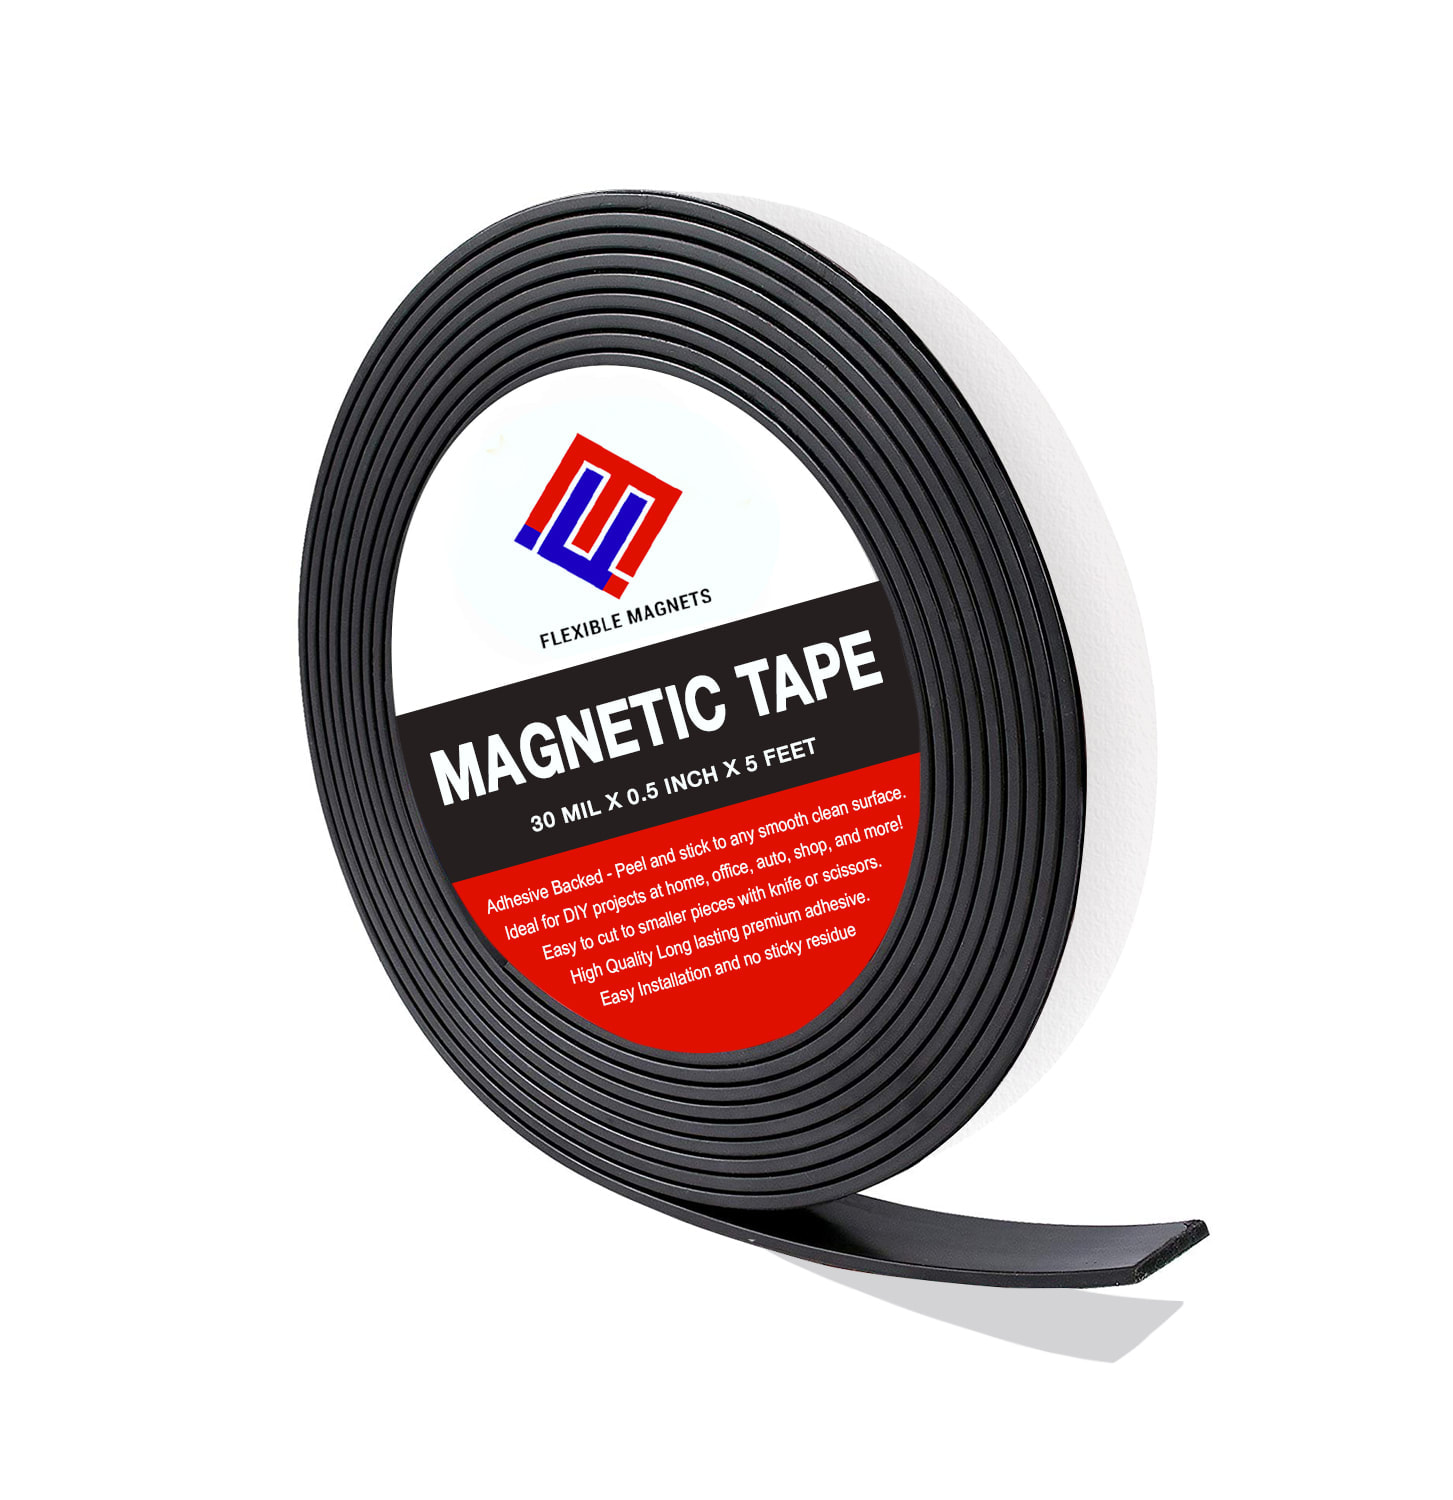 Flexible Magnetic Tape Roll with Adhesive Backing- Super Sticky!